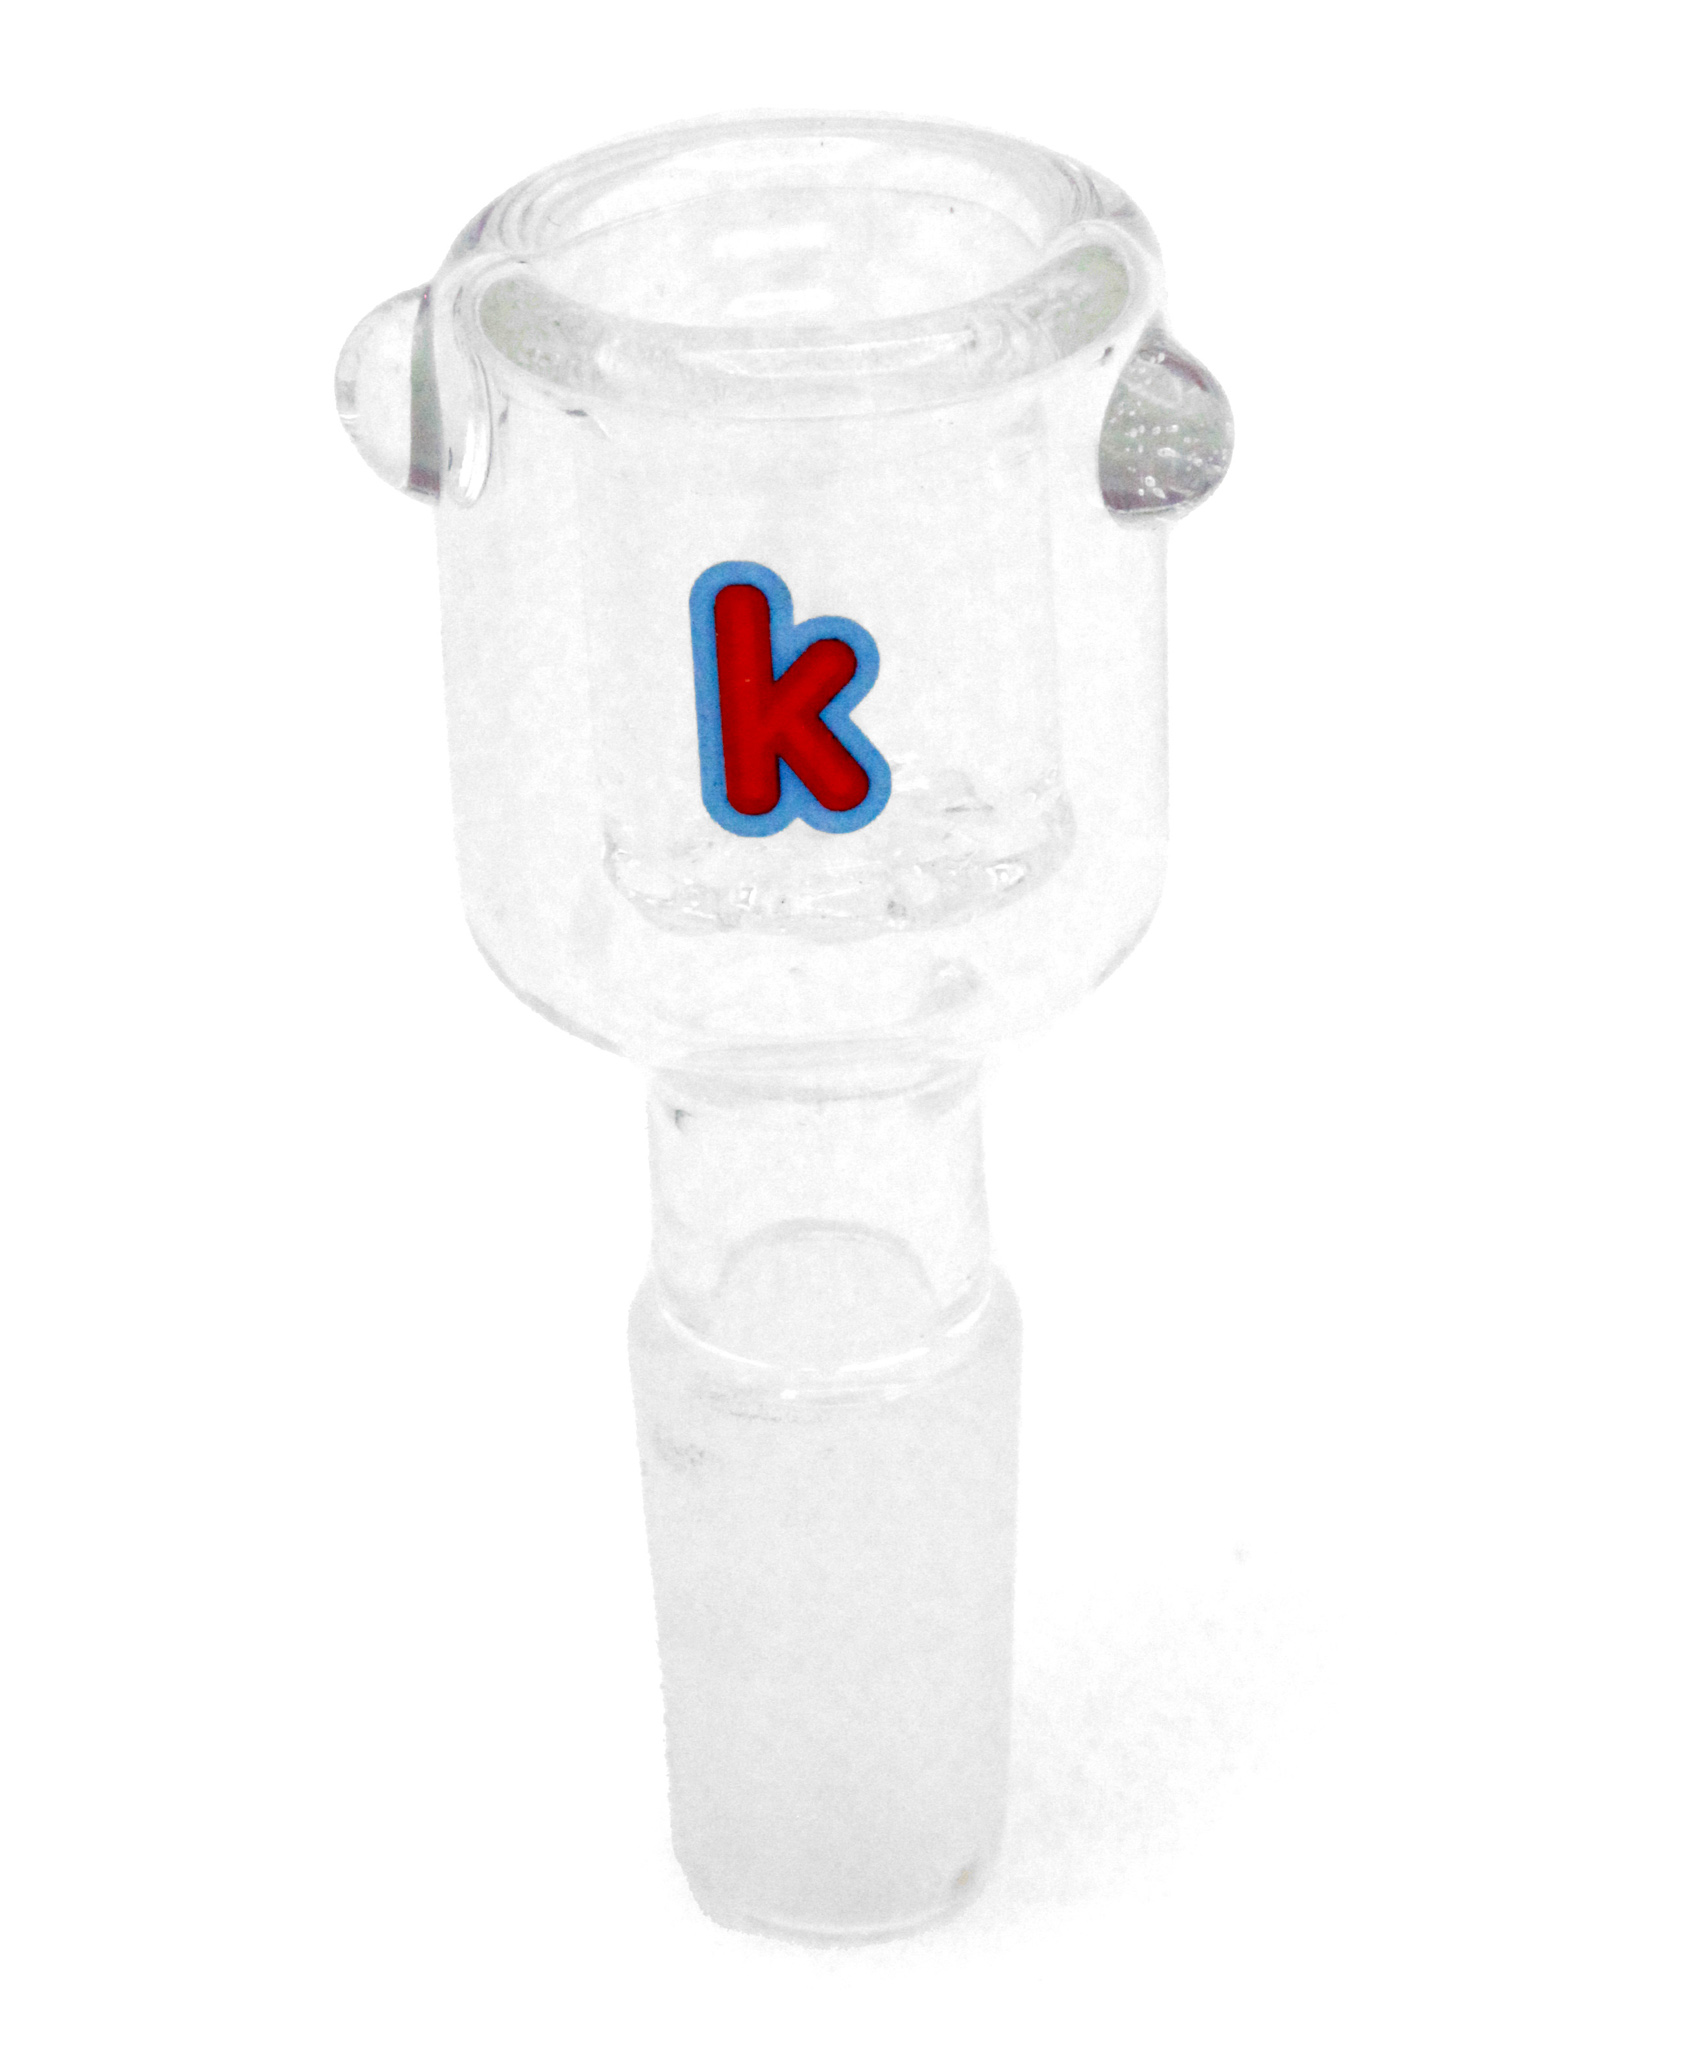 Kandy Glass Bowl 14mm Male Cup W/Screen Inside Of a Cup Shaped Head & Two Marbles On Top